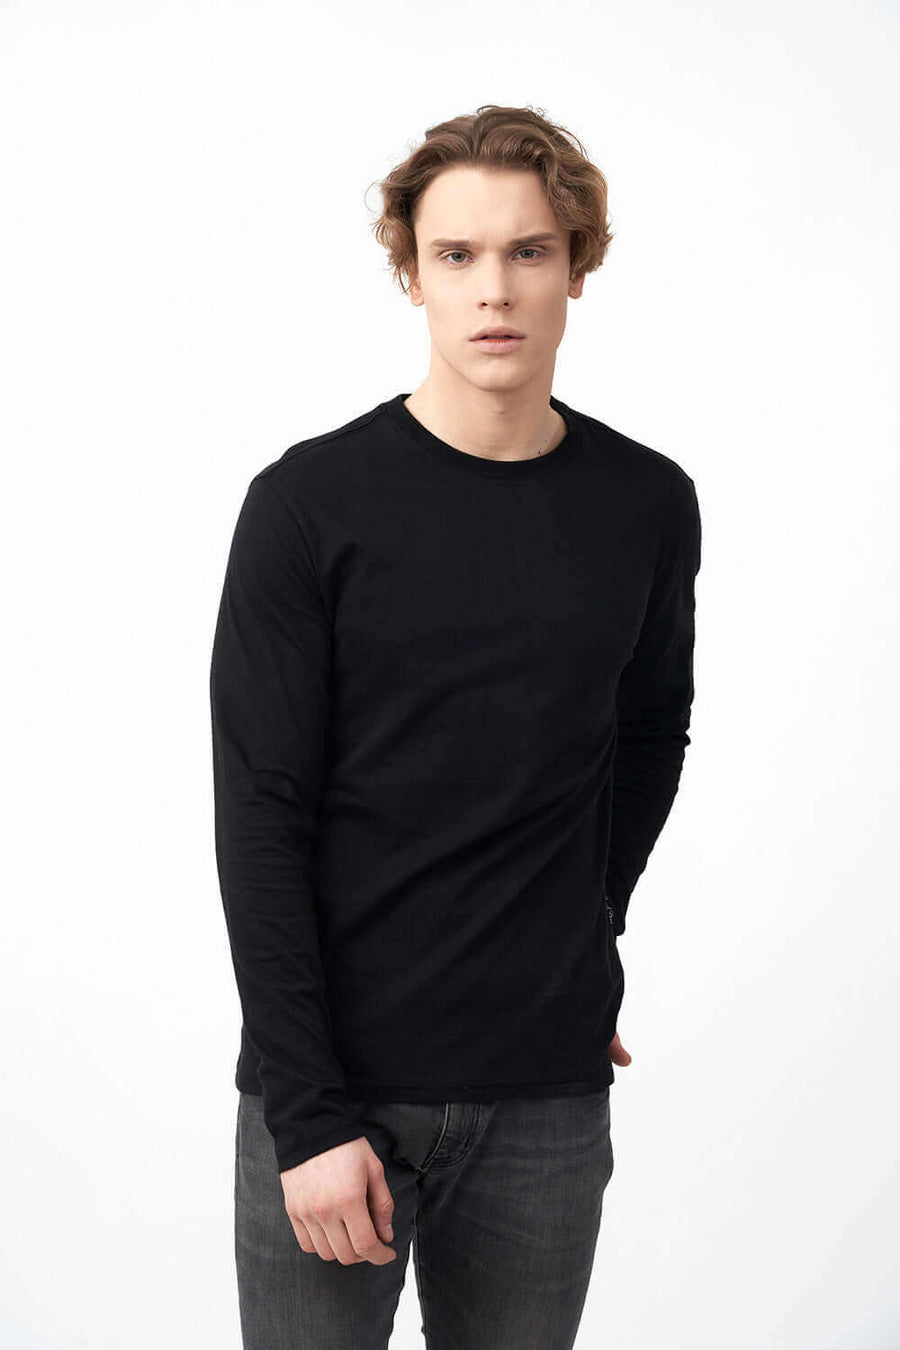 Front View of Crew Neck Long Sleeve Men's Shirts in Black